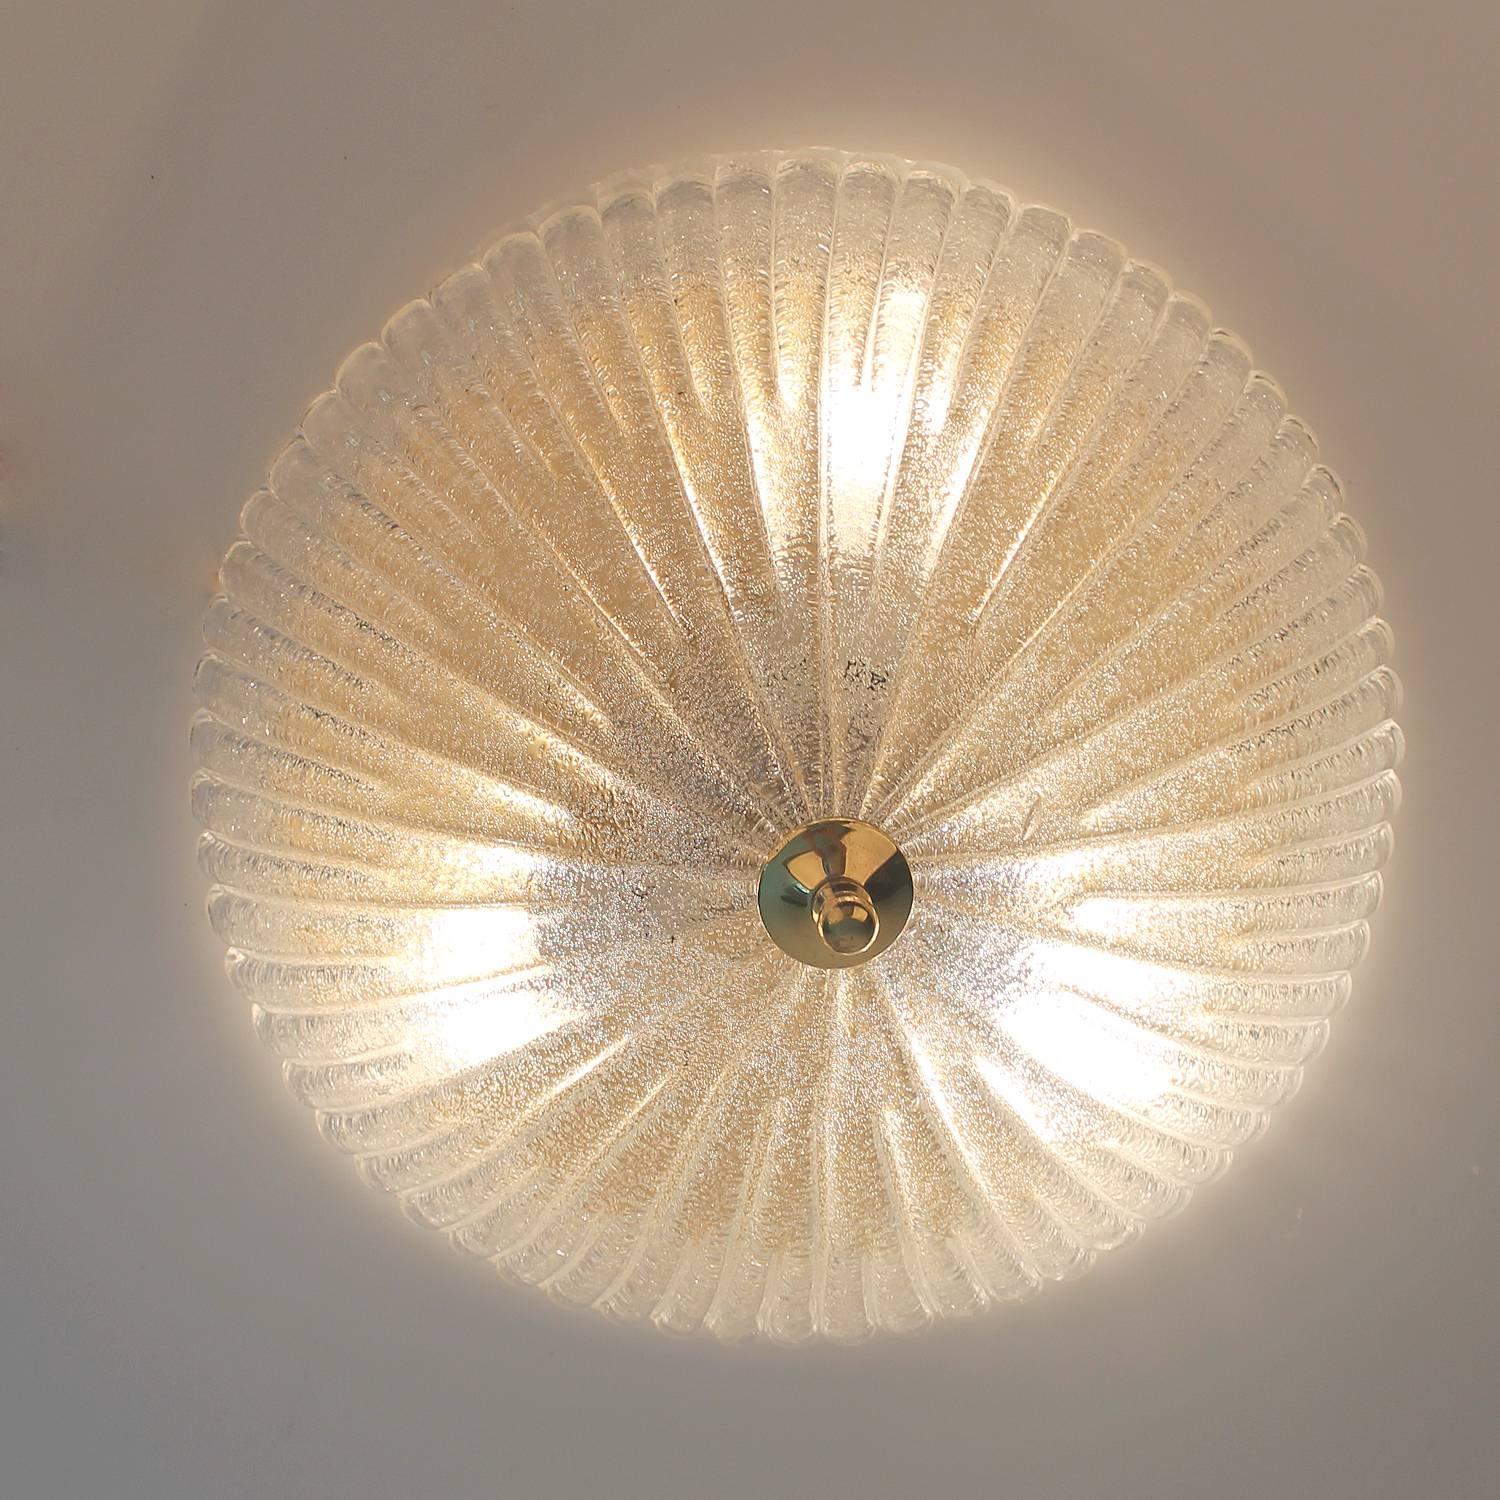 All our light´s electricals are professionally checked and tested for worldwide use
Midcentury glass flush mount light in the manner of Barovier e Toso, ribbed glass with brass finial, white enameled base.
Measure: 5.12 in. / 13 cm